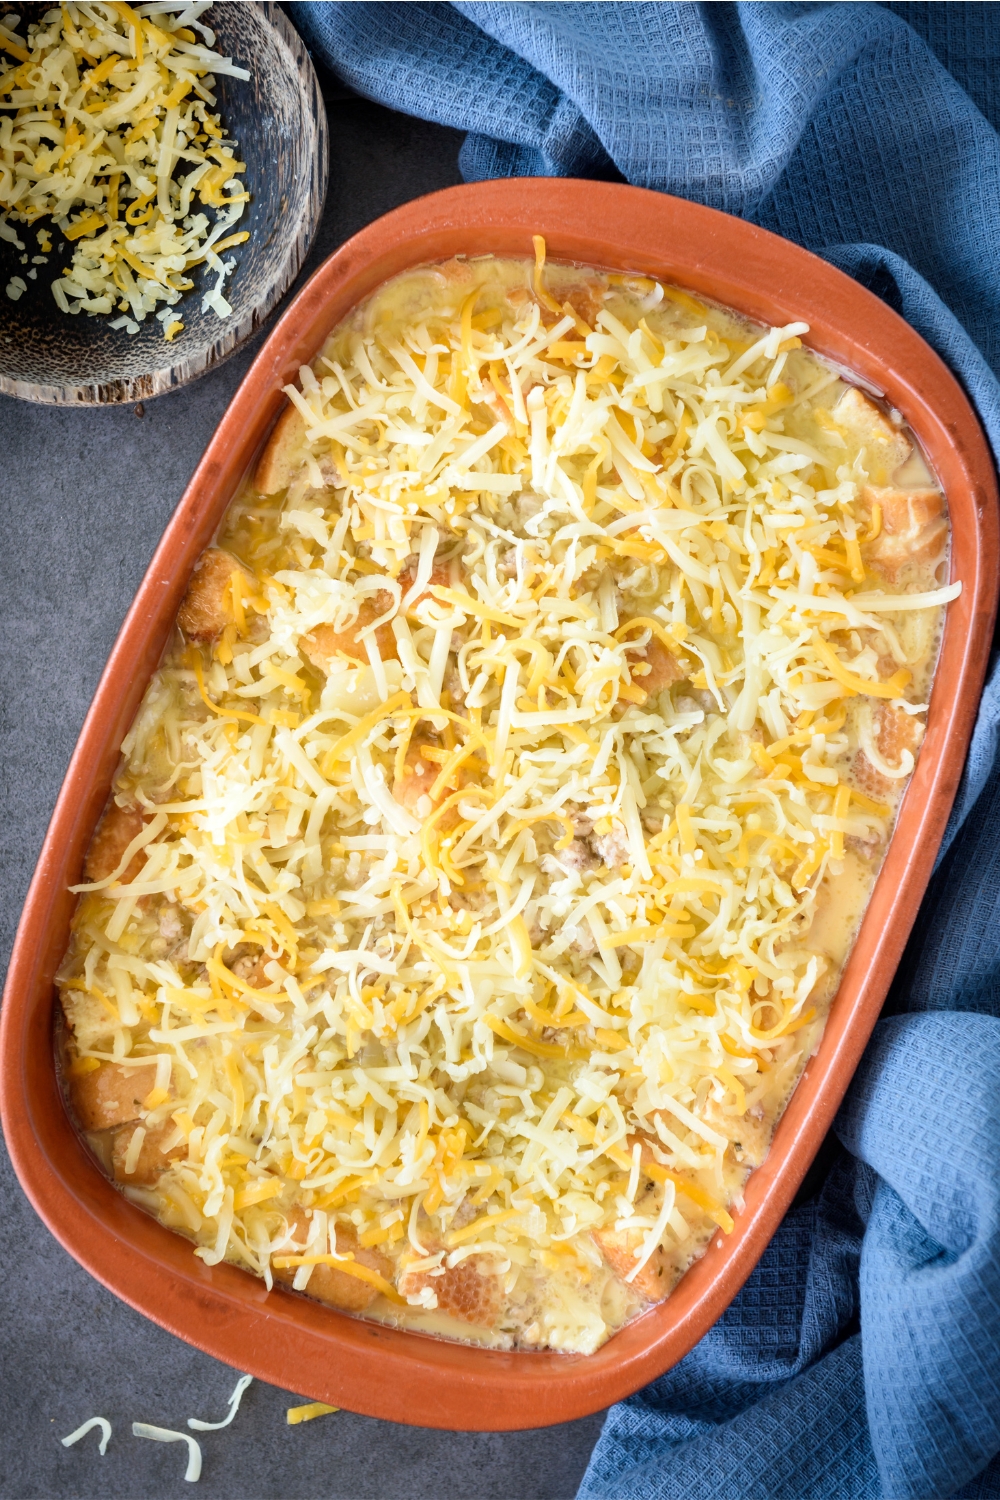 A baking dish filled with unbaked casserole topped with shredded cheese.